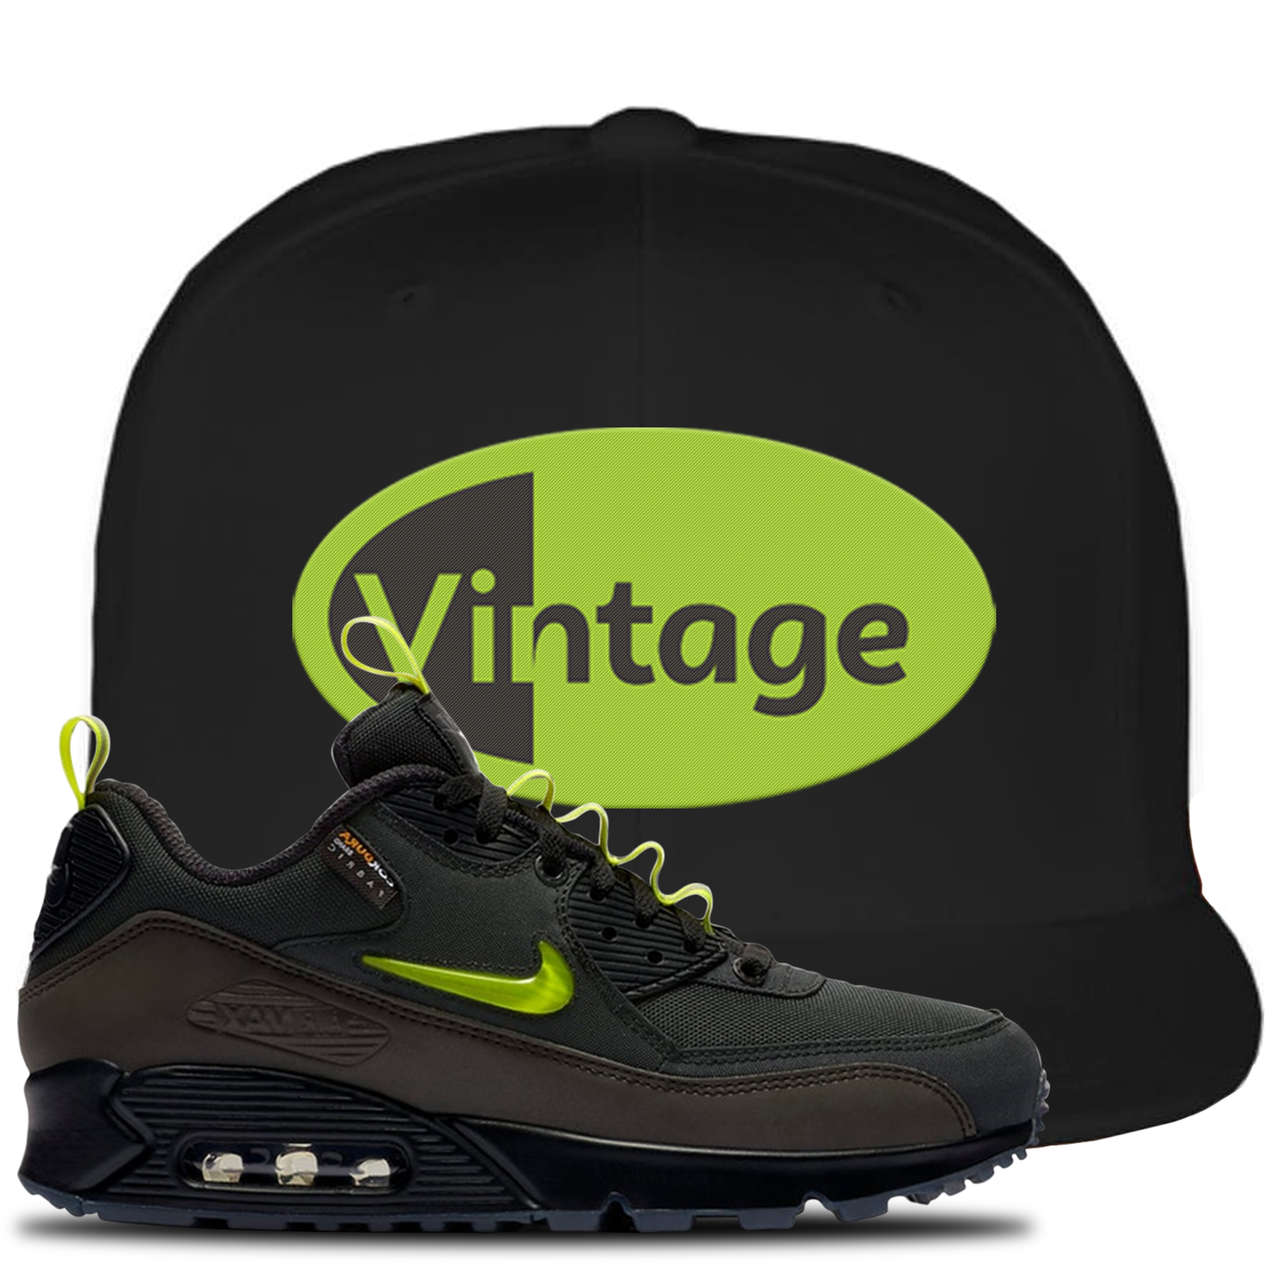 The Basement X Air Max 90 Manchester Vintage Oval Black Sneaker Hook Up Snapback Hat